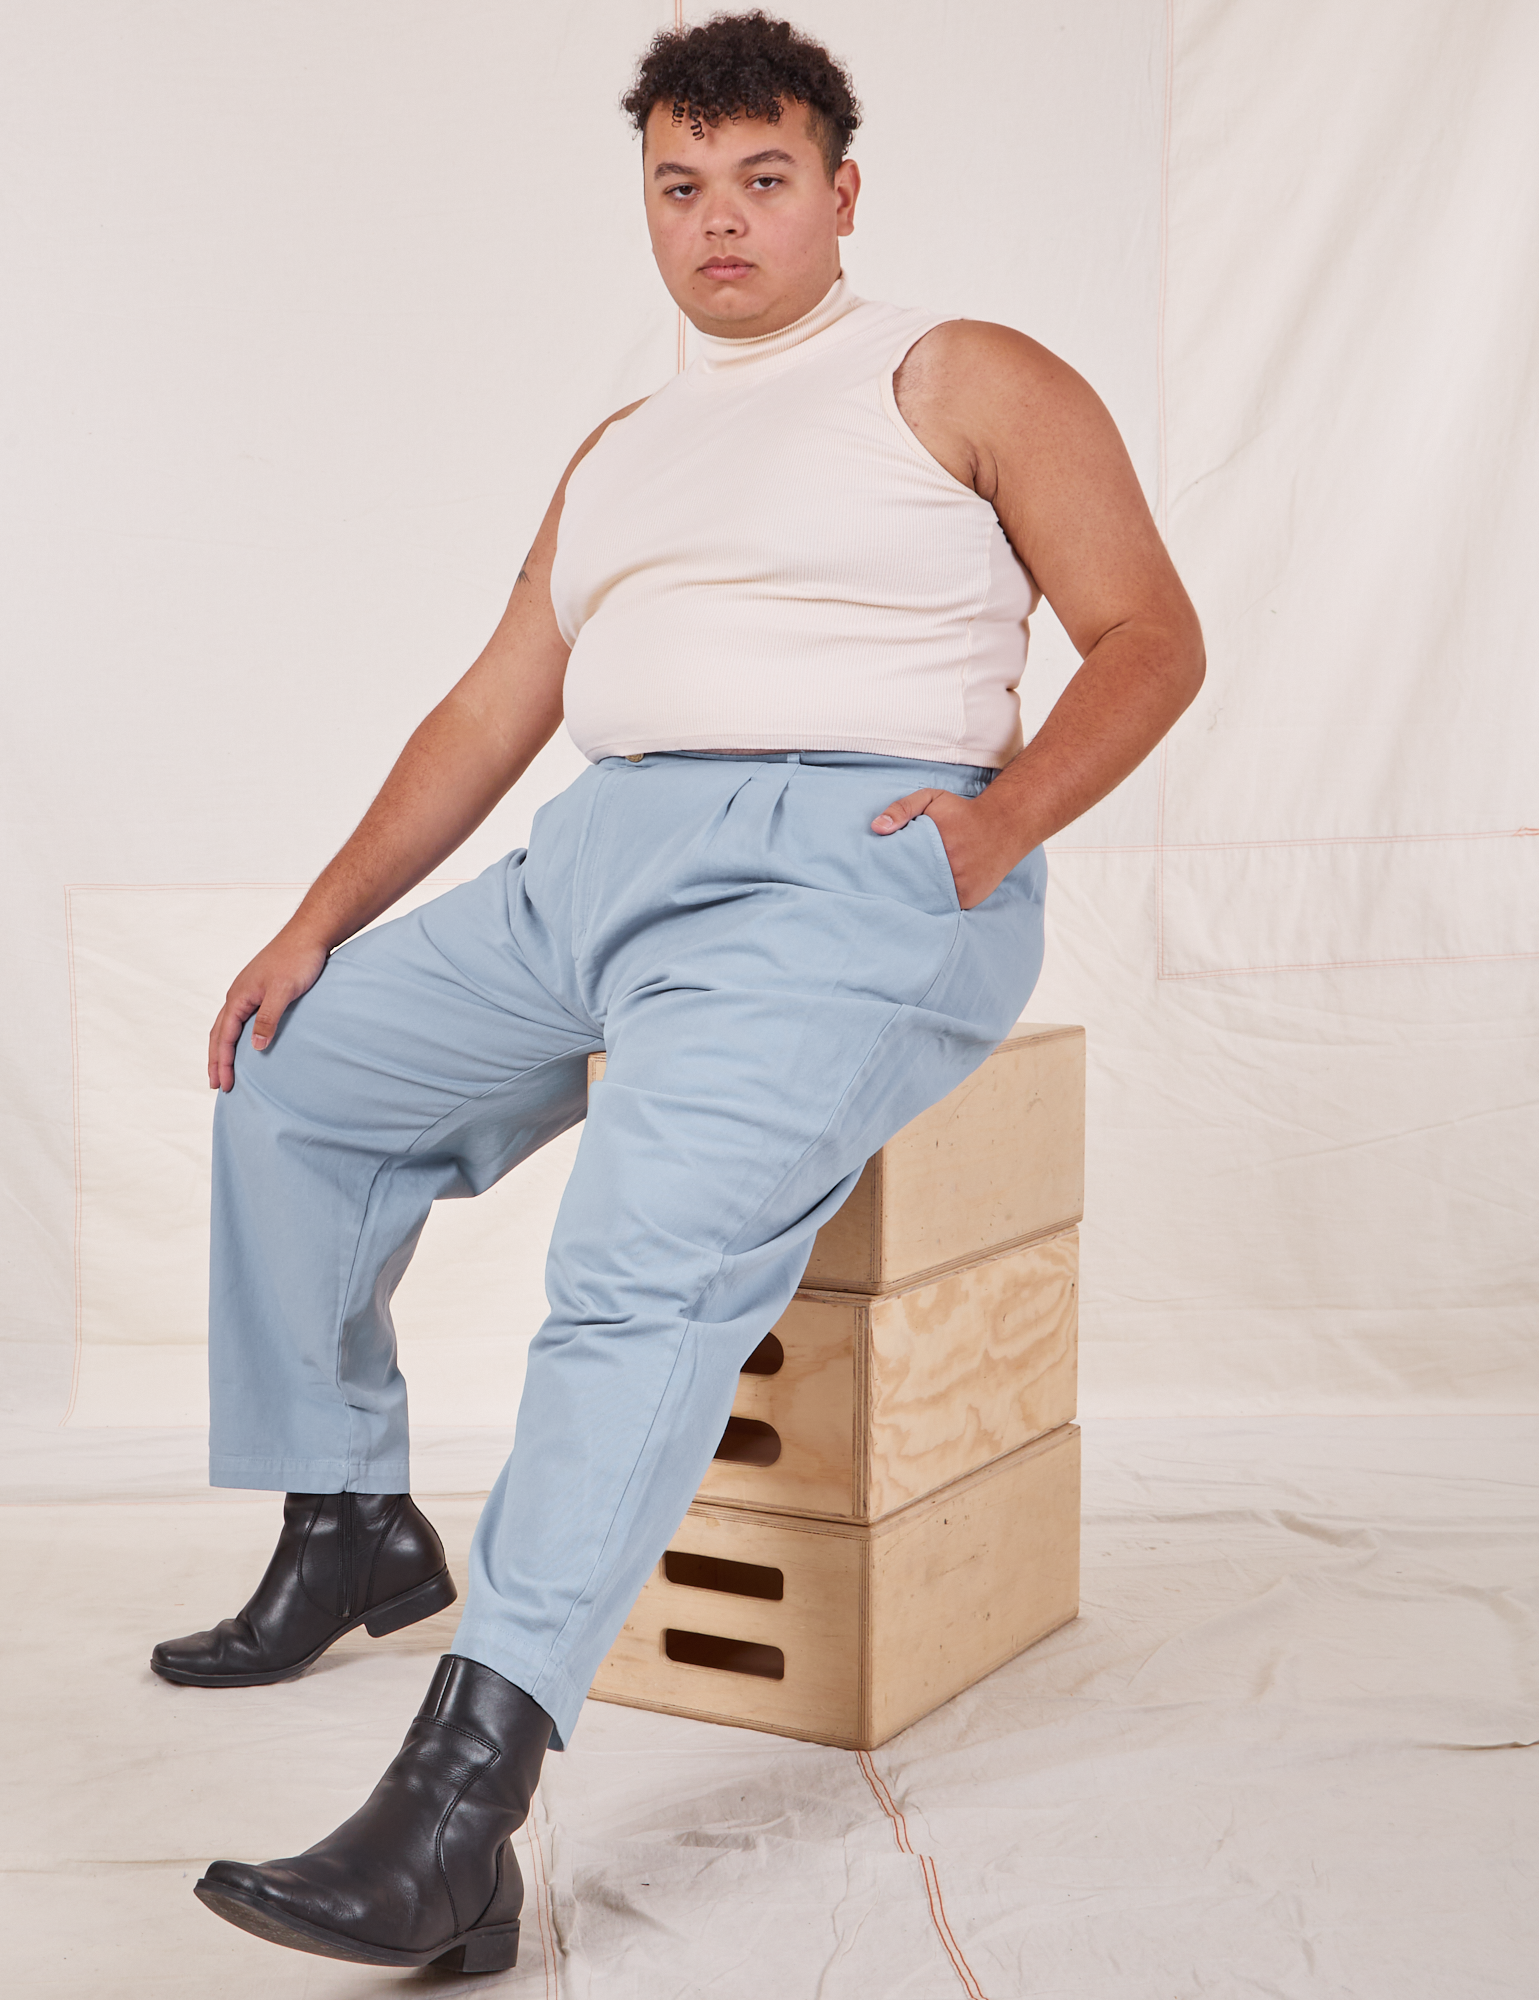 Miguel is wearing Heavyweight Trousers in Periwinkle and vintage off-white Sleeveless Tank Top. He is sitting on a stack of wooden crates.